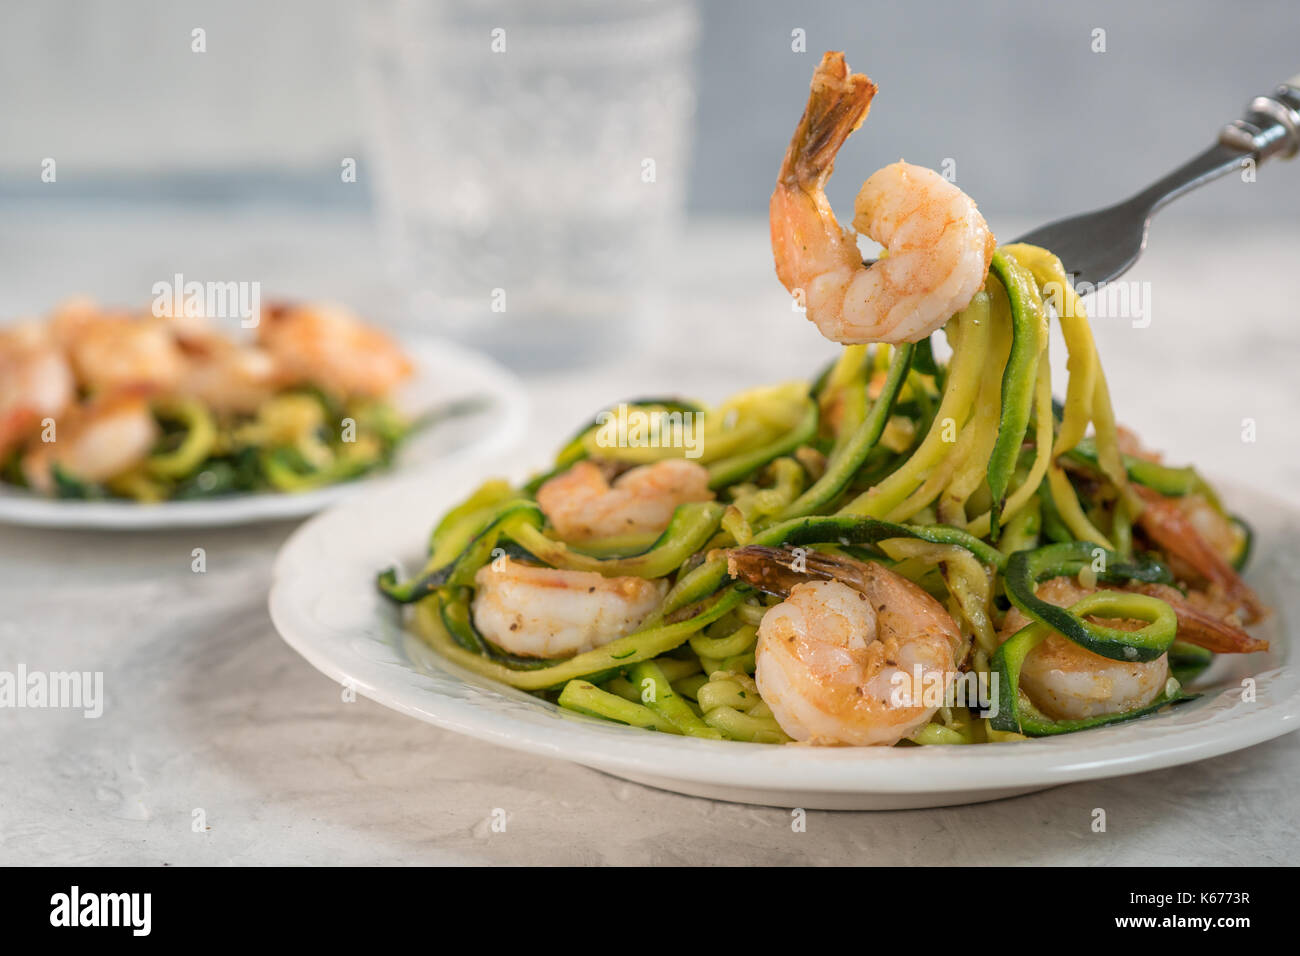 Skinny Shrimp Scampi with Zucchini Noodles. Low carb meal Stock Photo